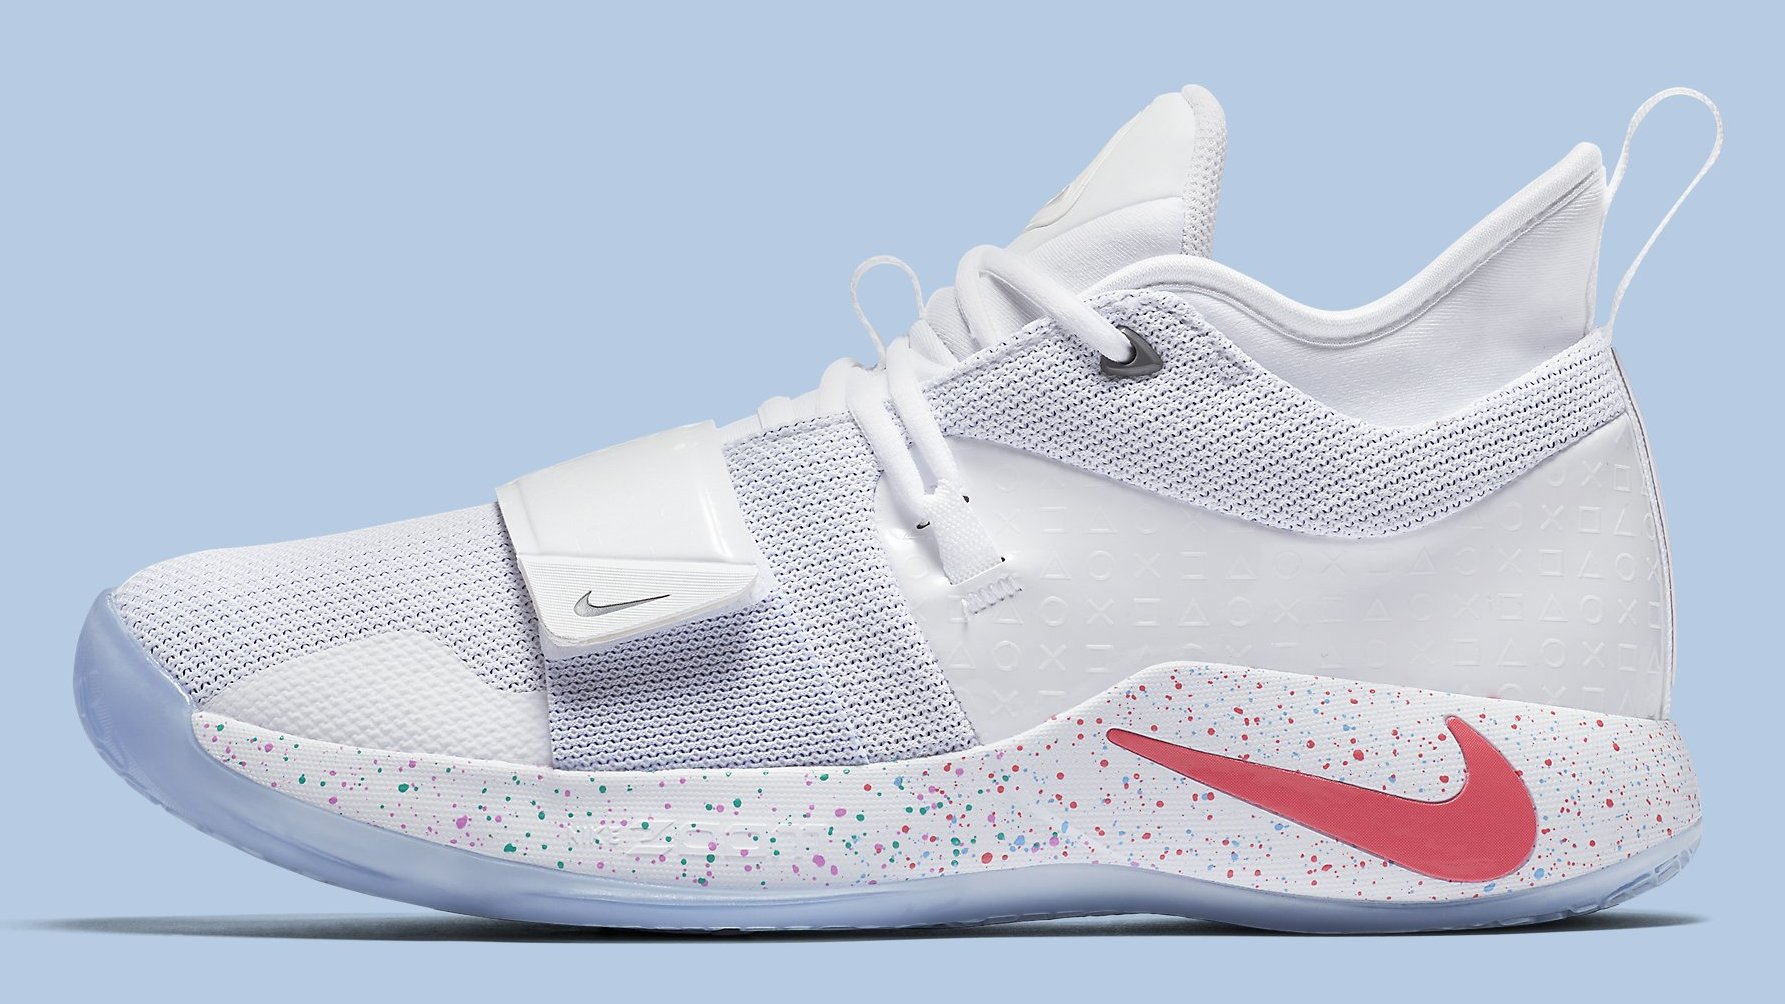 Nike PG 2.5 Playstation White Release Date BQ8388 100 Profile